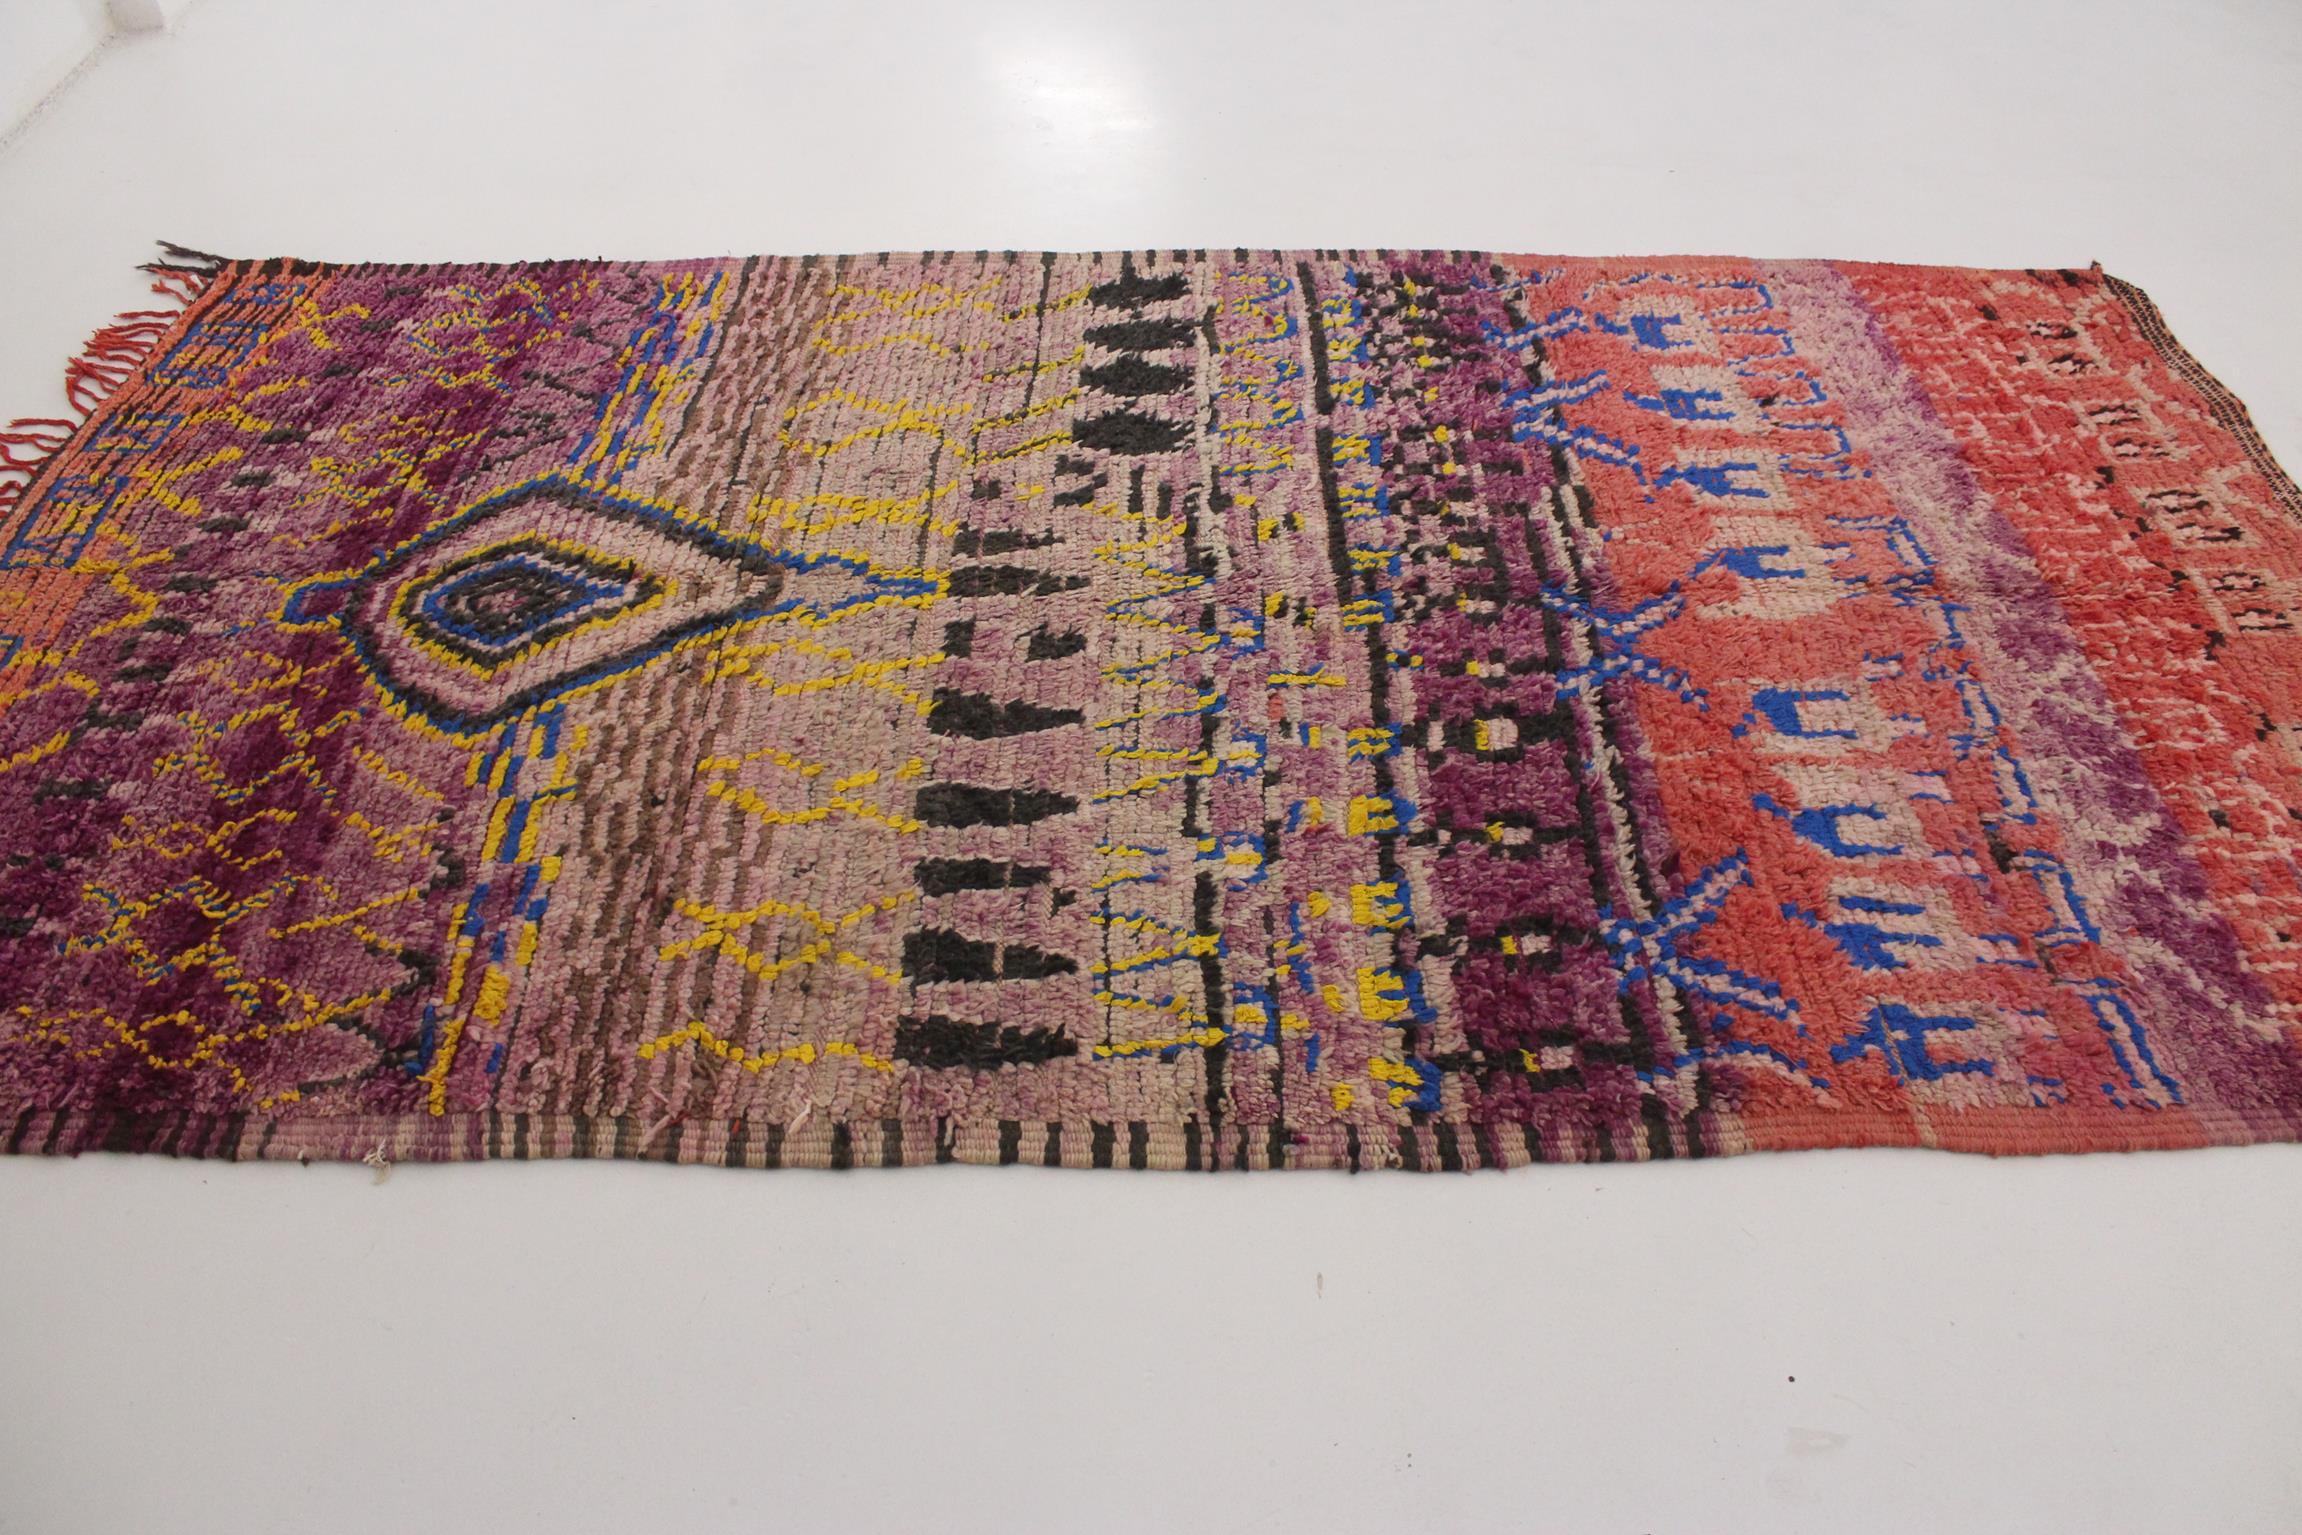 Vintage Moroccan Boujad rug - Purple/red - 5.9x11feet / 180x338cm In Good Condition For Sale In Marrakech, MA